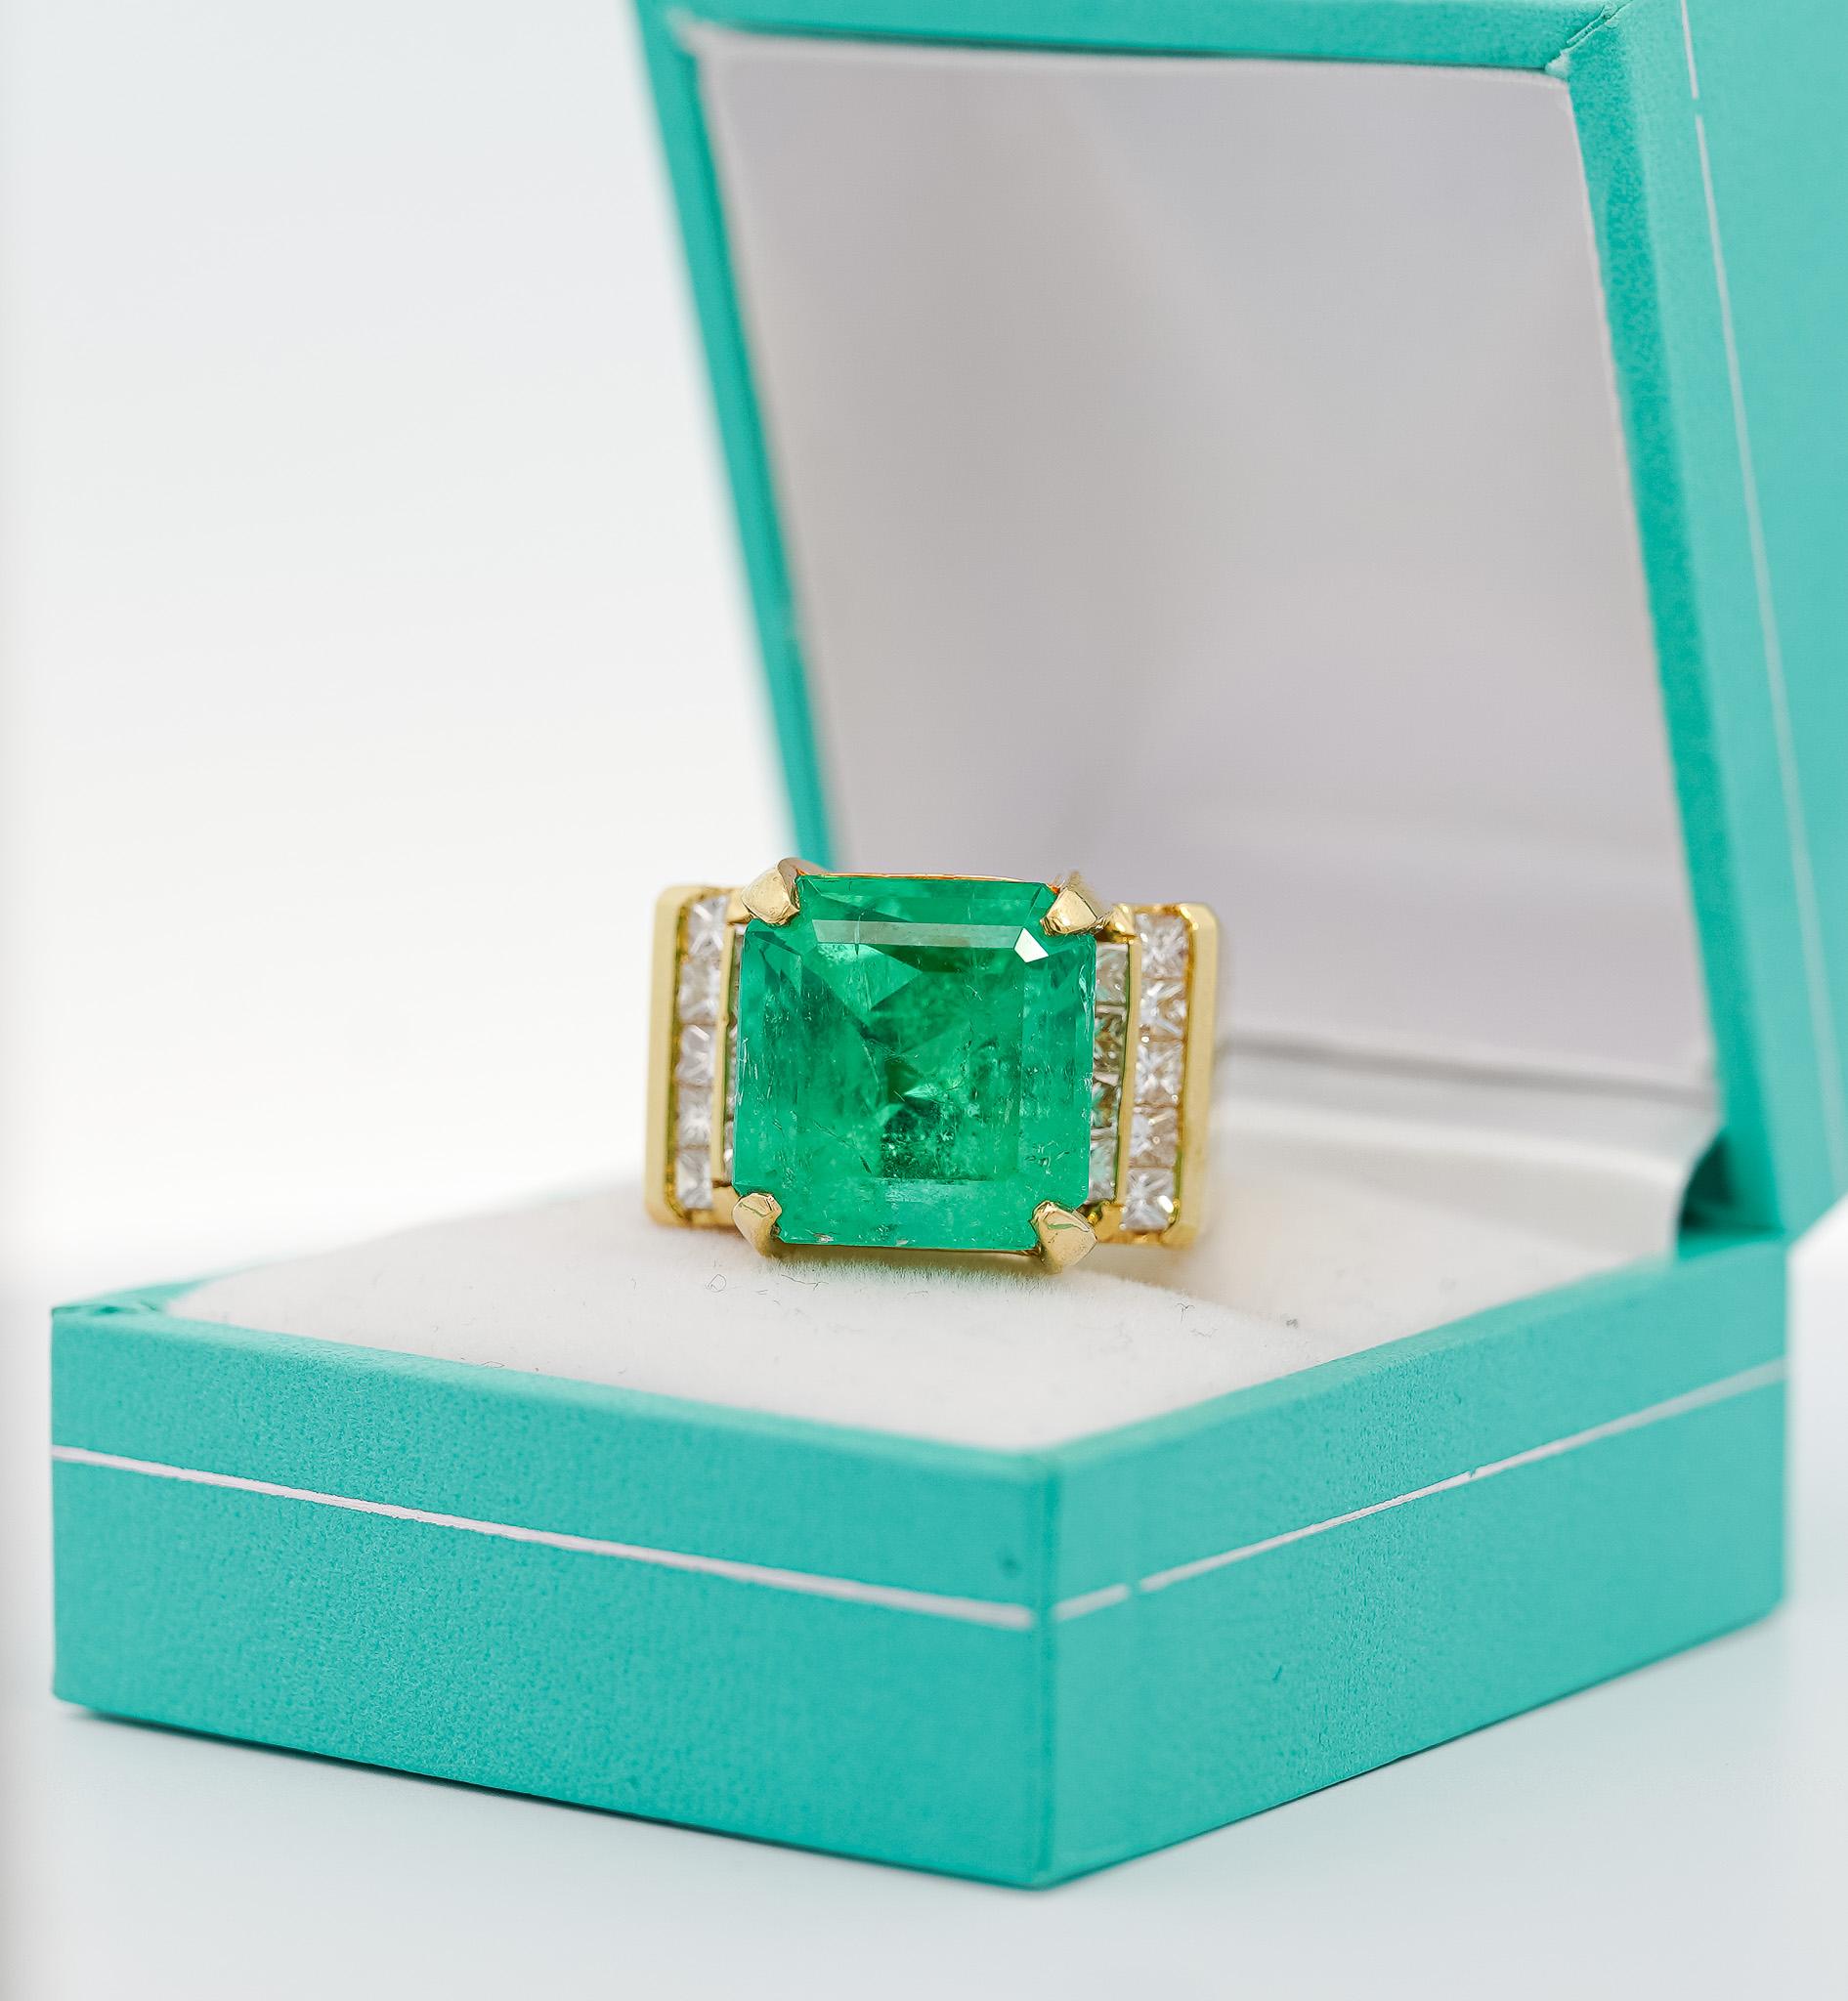 GIA certified 13 carat Colombian emerald and princess cut diamond ring in 18 karat solid yellow gold. Vintage ring, circa 2000. The emerald features excellent luster, transparency, and richly dense green color saturation. Emerald cut center stone